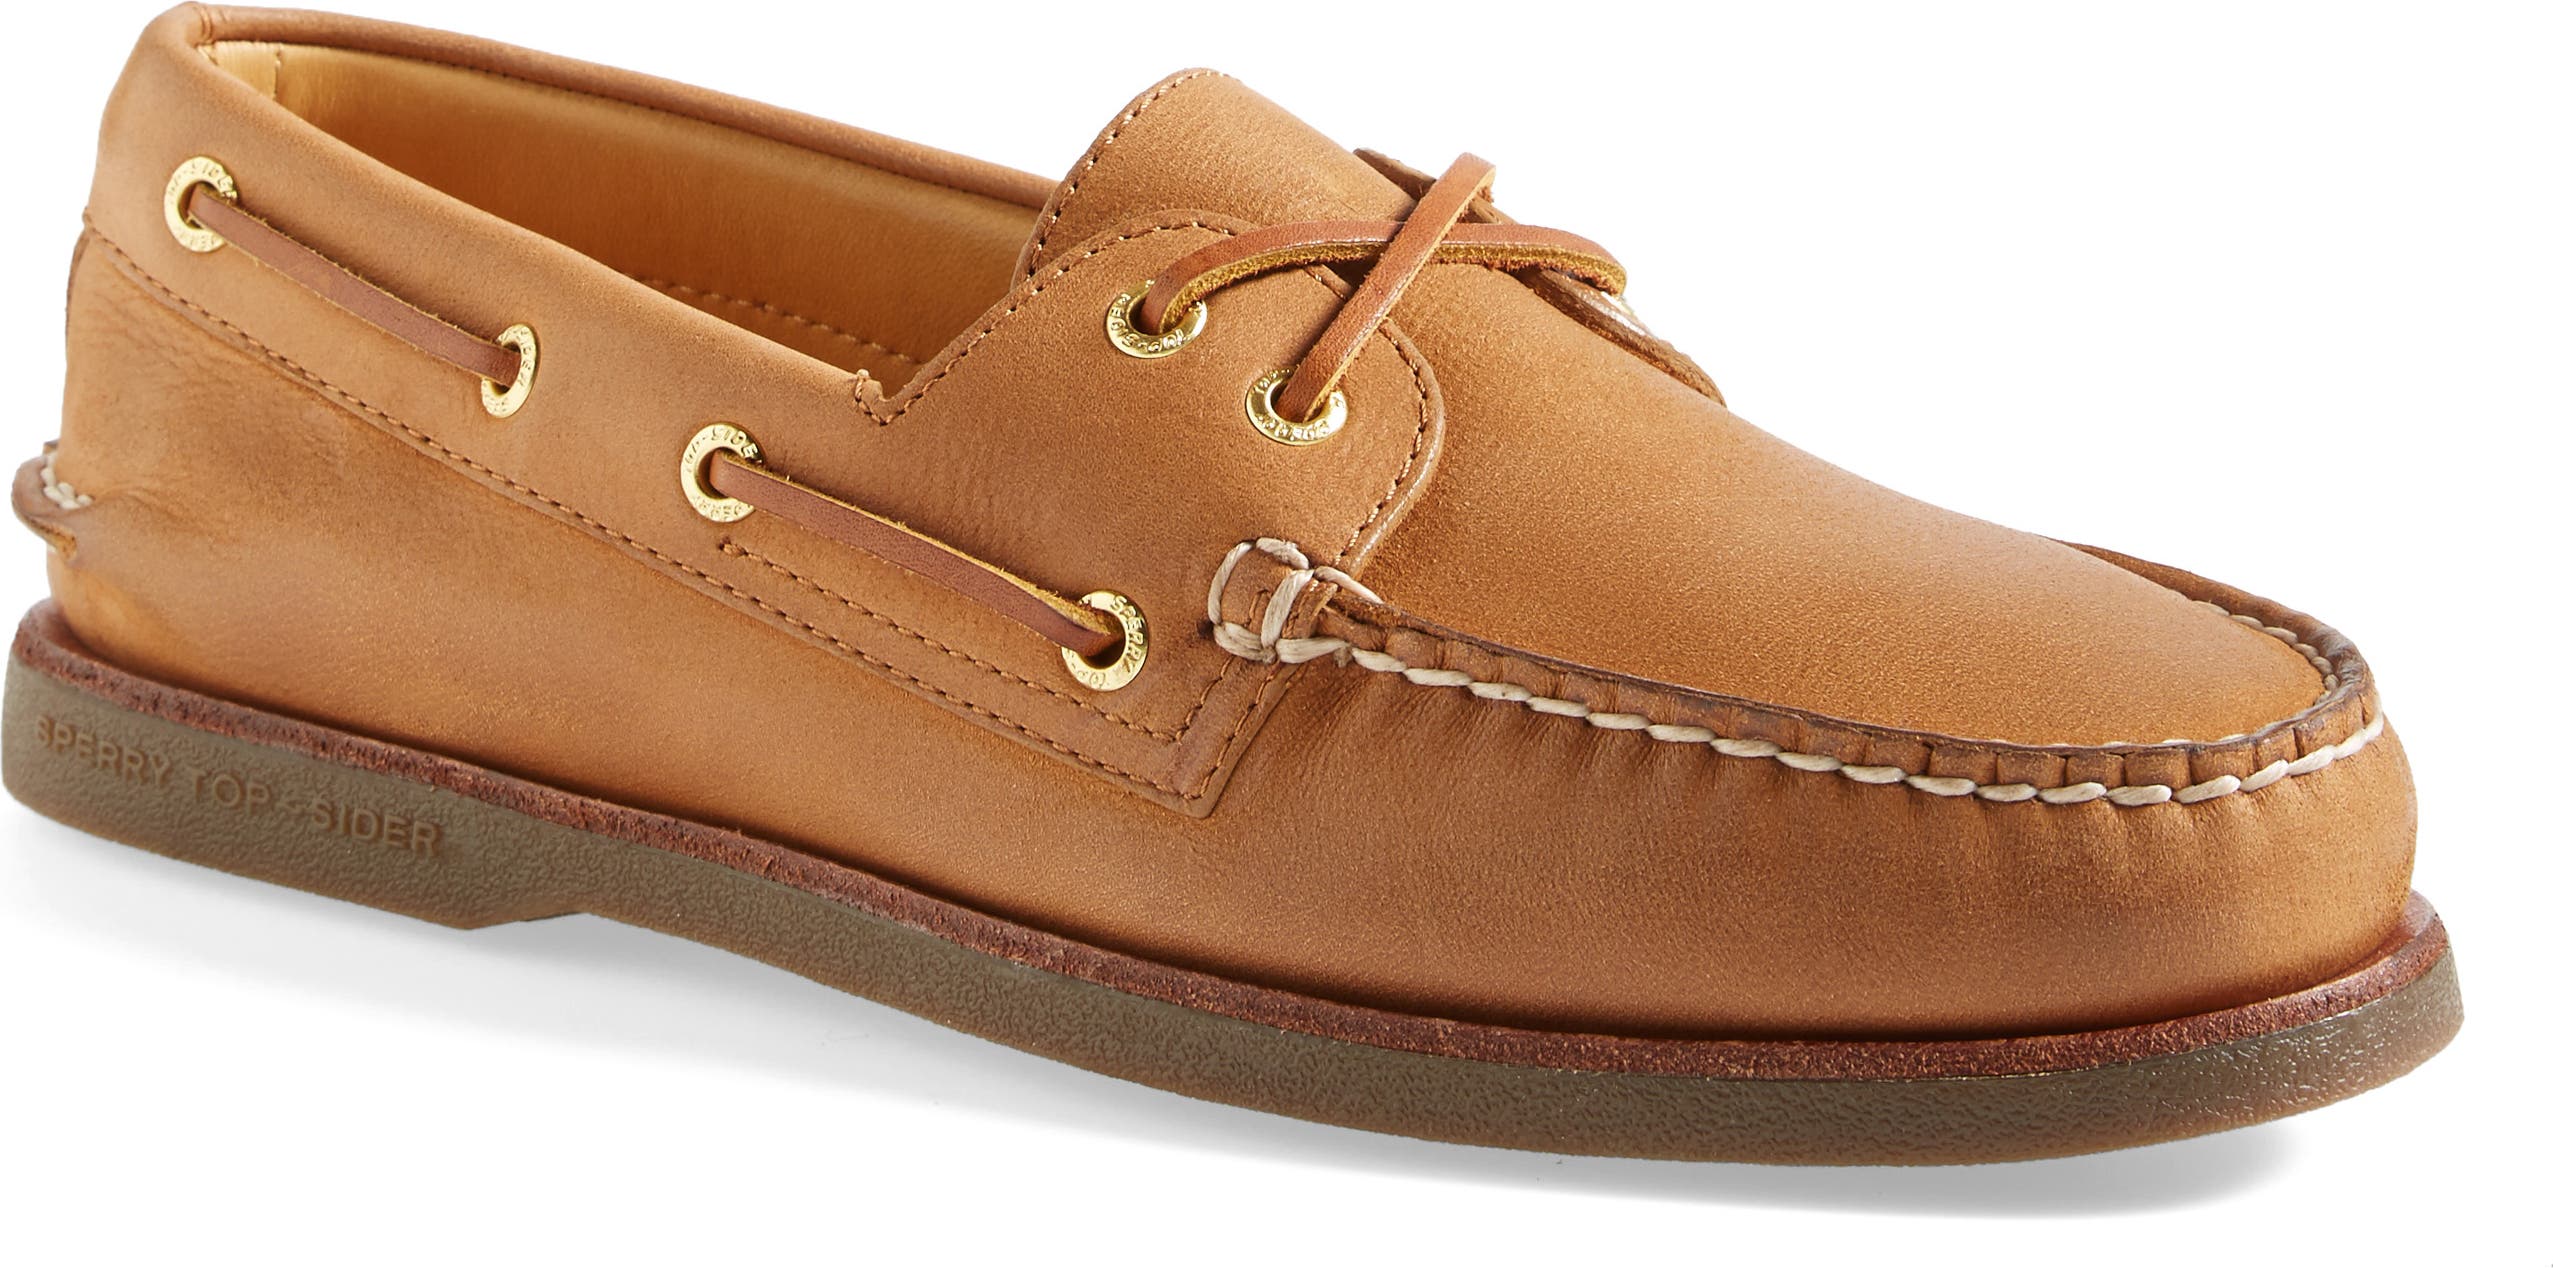 Sperry Gold Cup Authentic Original Boat Shoe | Nordstrom